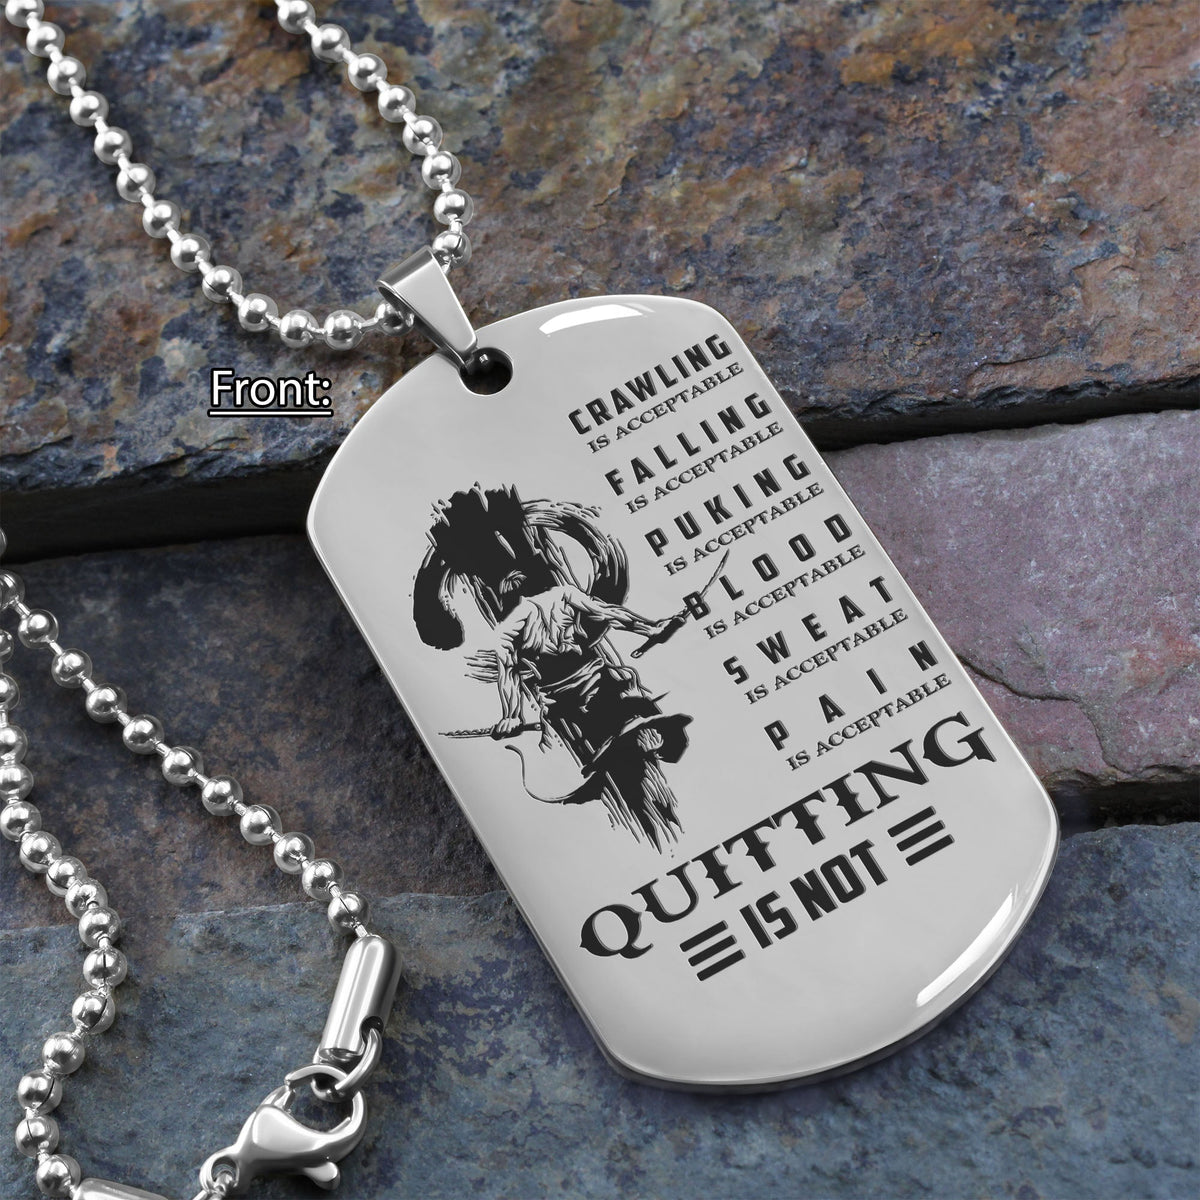 SAD031 - Quitting Is Not - PAIN - You Are Not Dead Yet - Samurai Dog Tag - Engrave Double Sliver Dog Tag